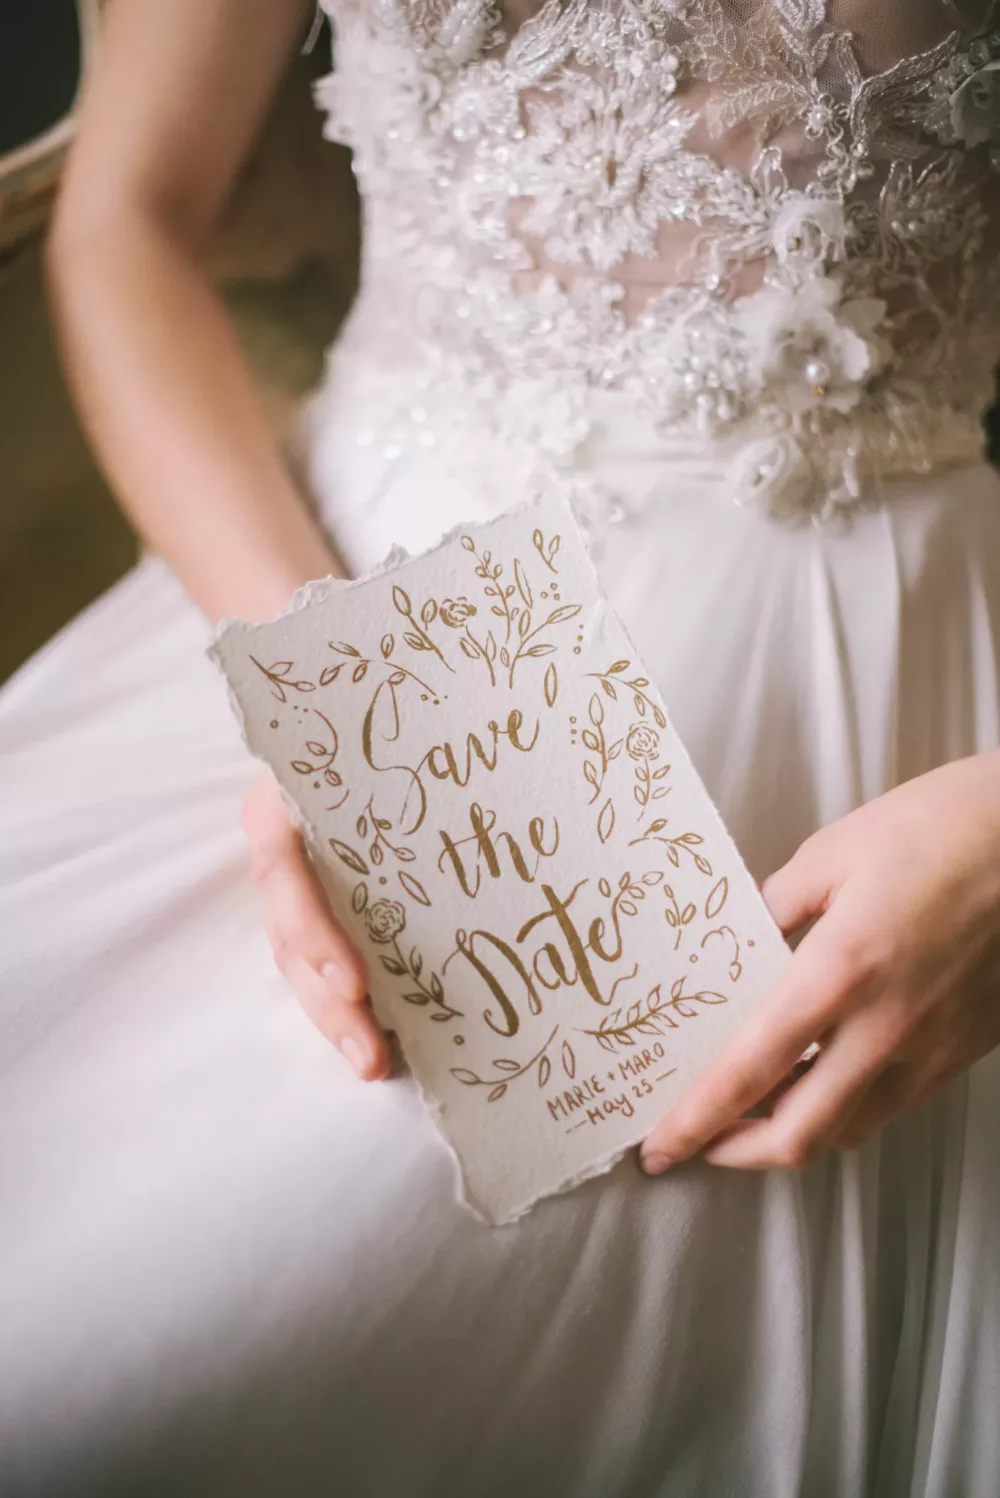 save the date invitation to a wedding